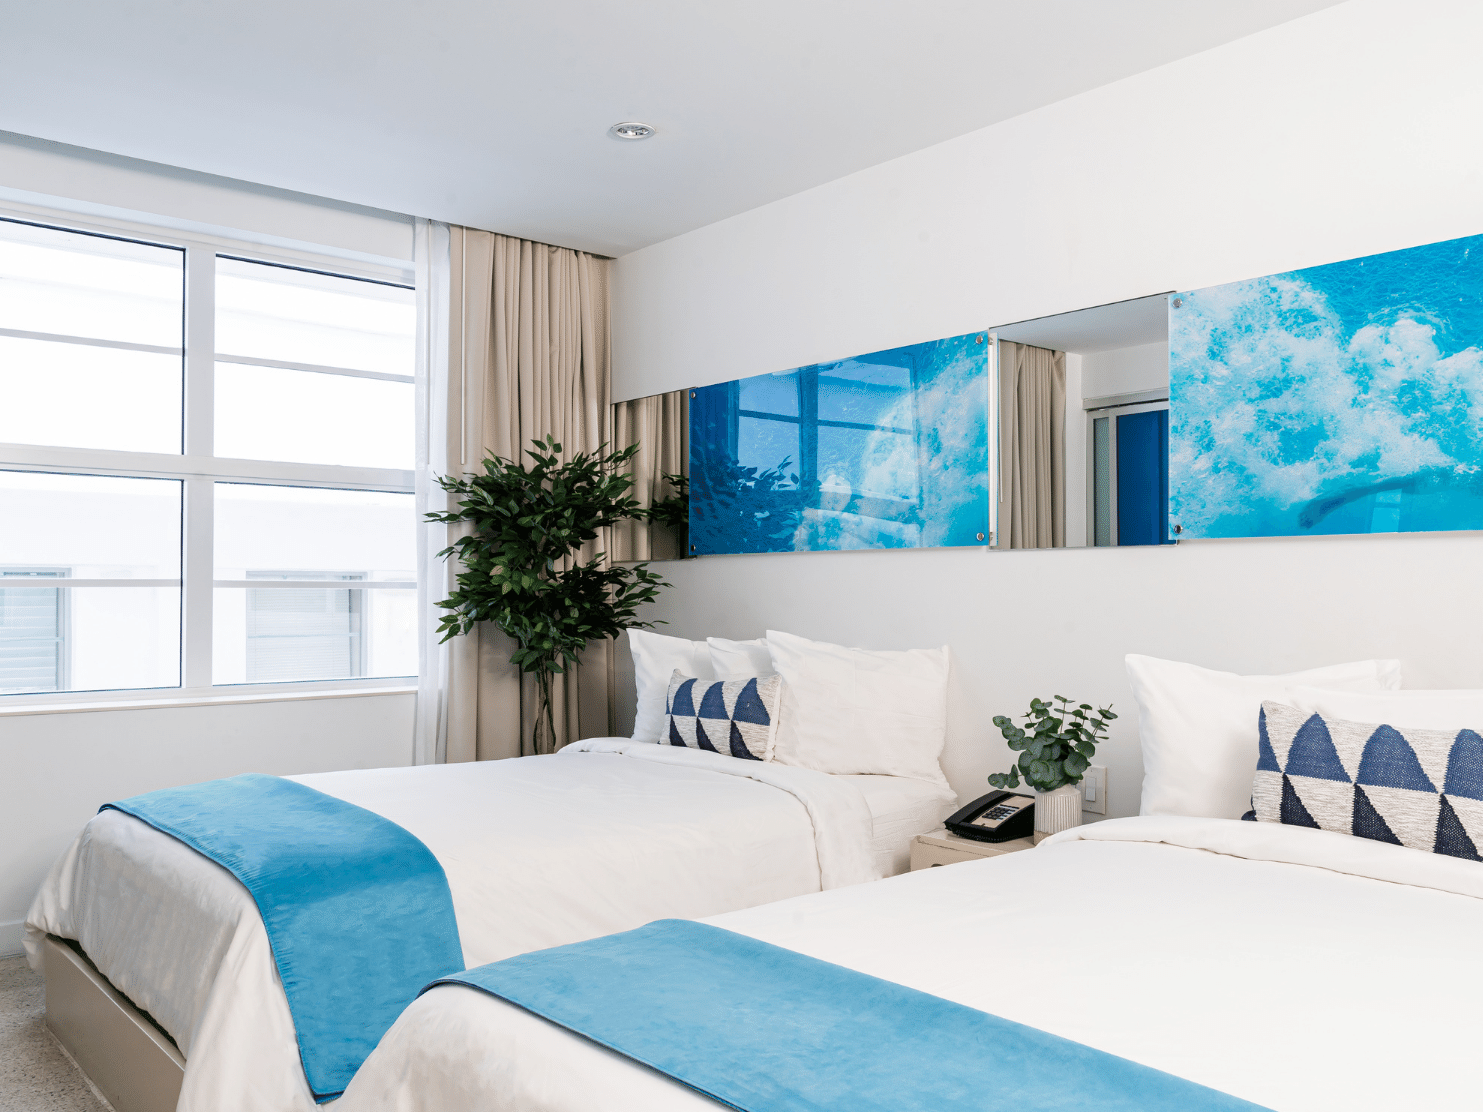 Dual double beds in classic room at Clevelander South Beach